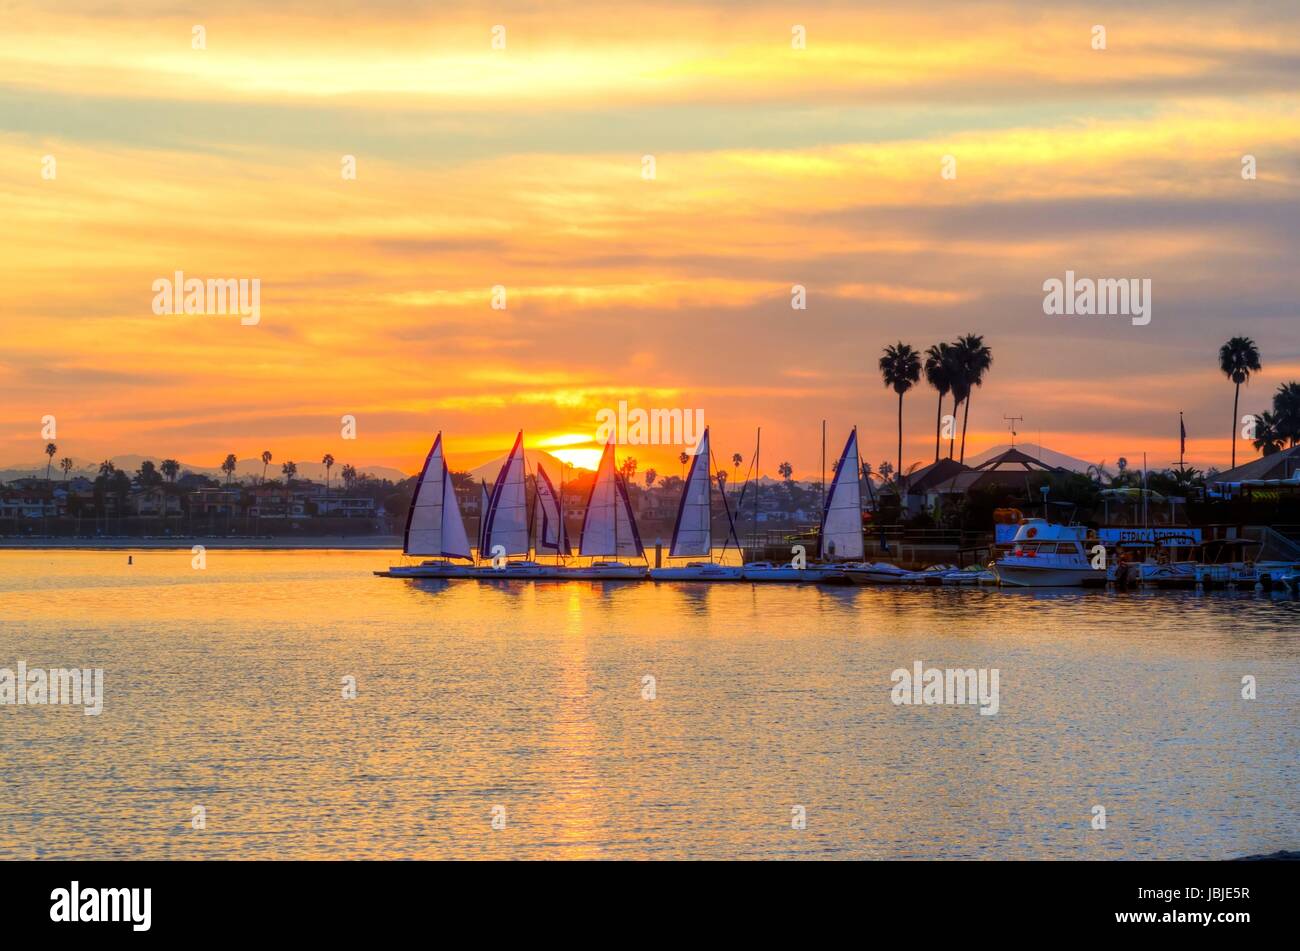 The sunrise over Sail bay in Mission Bay over the Pacific beach in San Diego, California in the United States of America. A view of the palm trees, sail boats and beautiful saltwater bay at sunset. Stock Photo